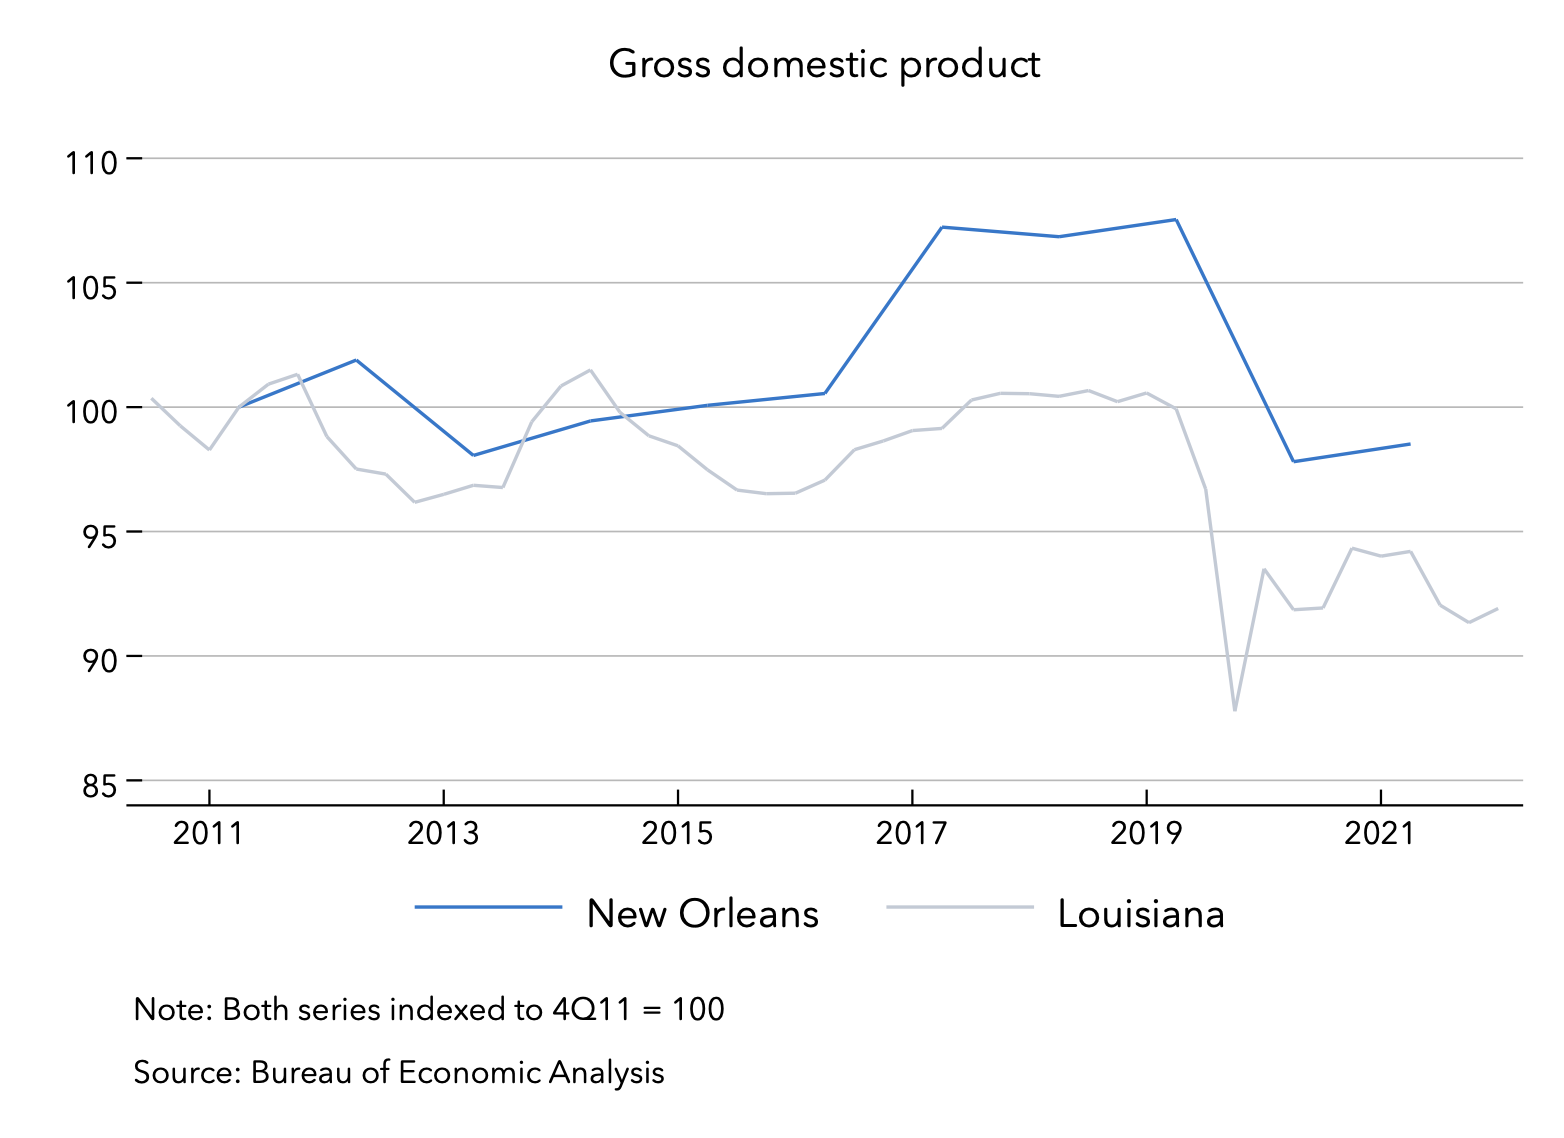 14 Feb 2023 New Orleans gdp